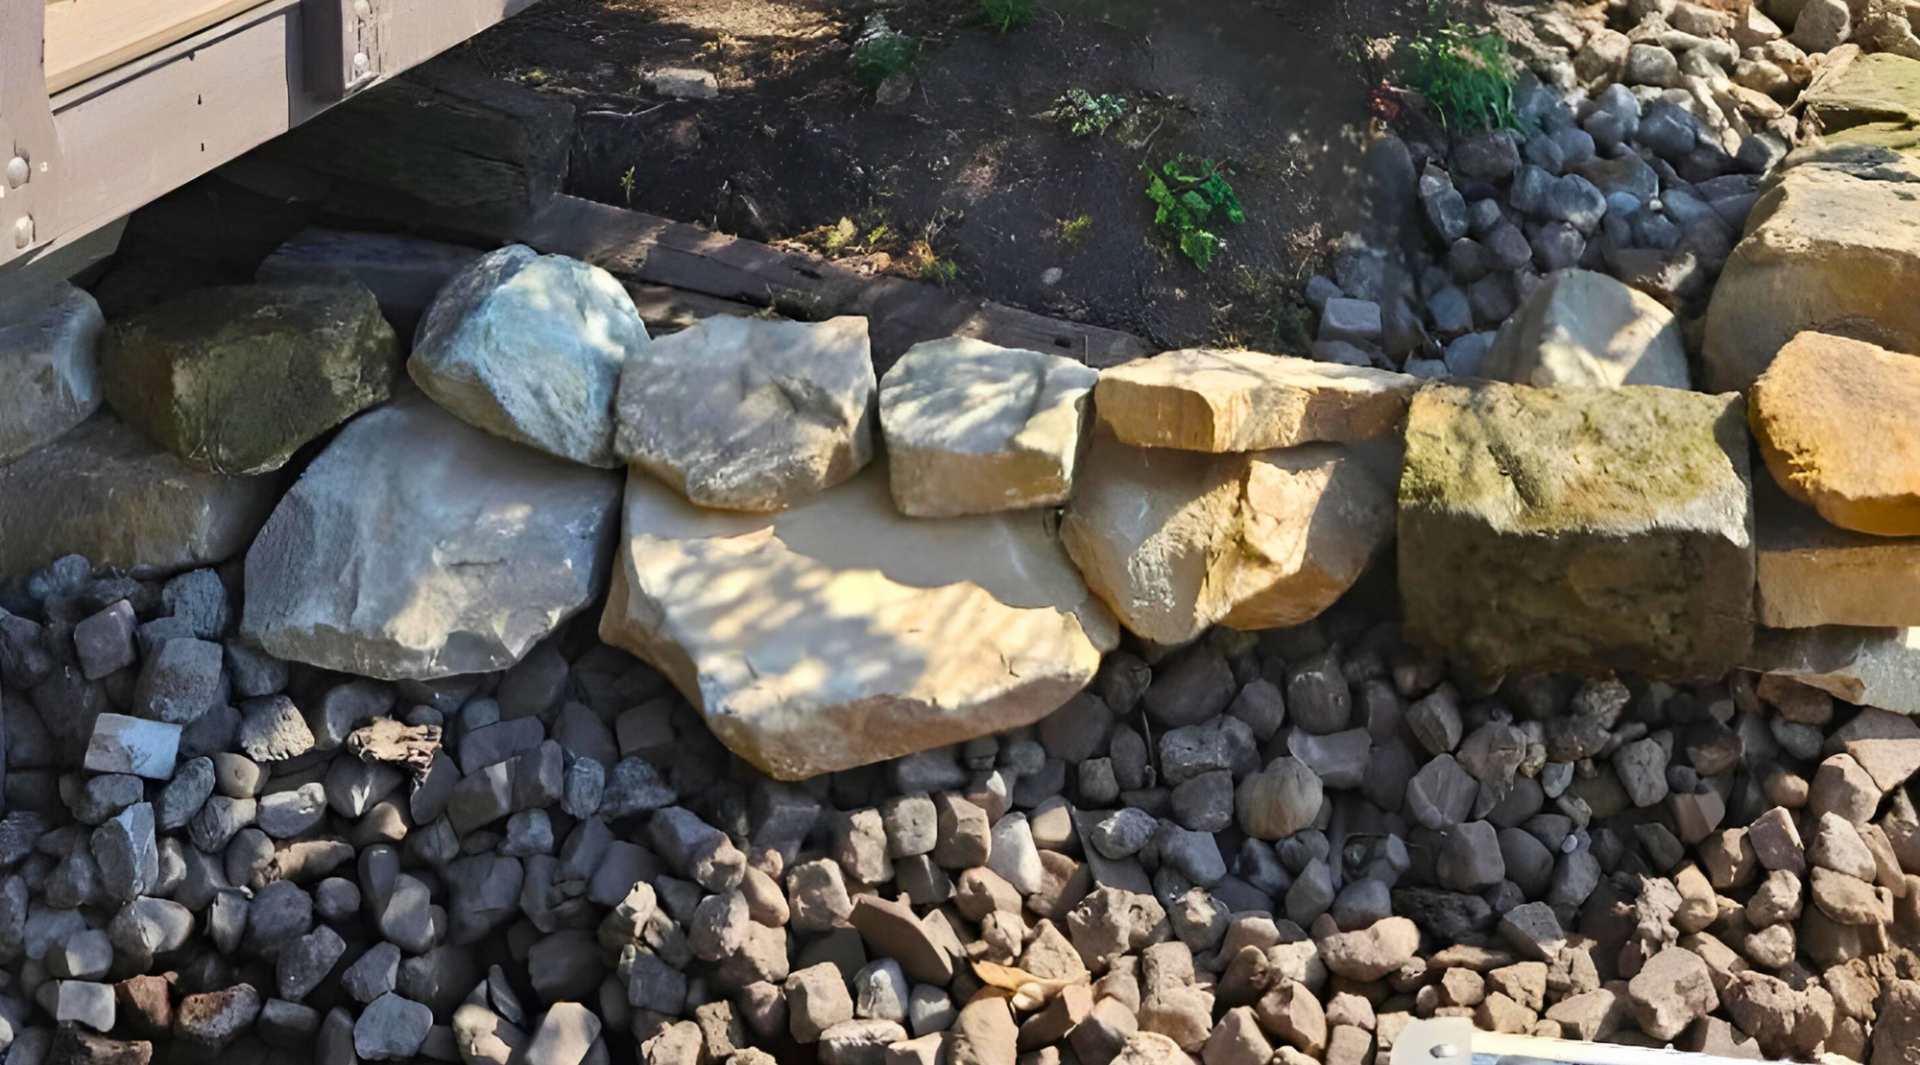 A pile of rocks and gravel under a bridge